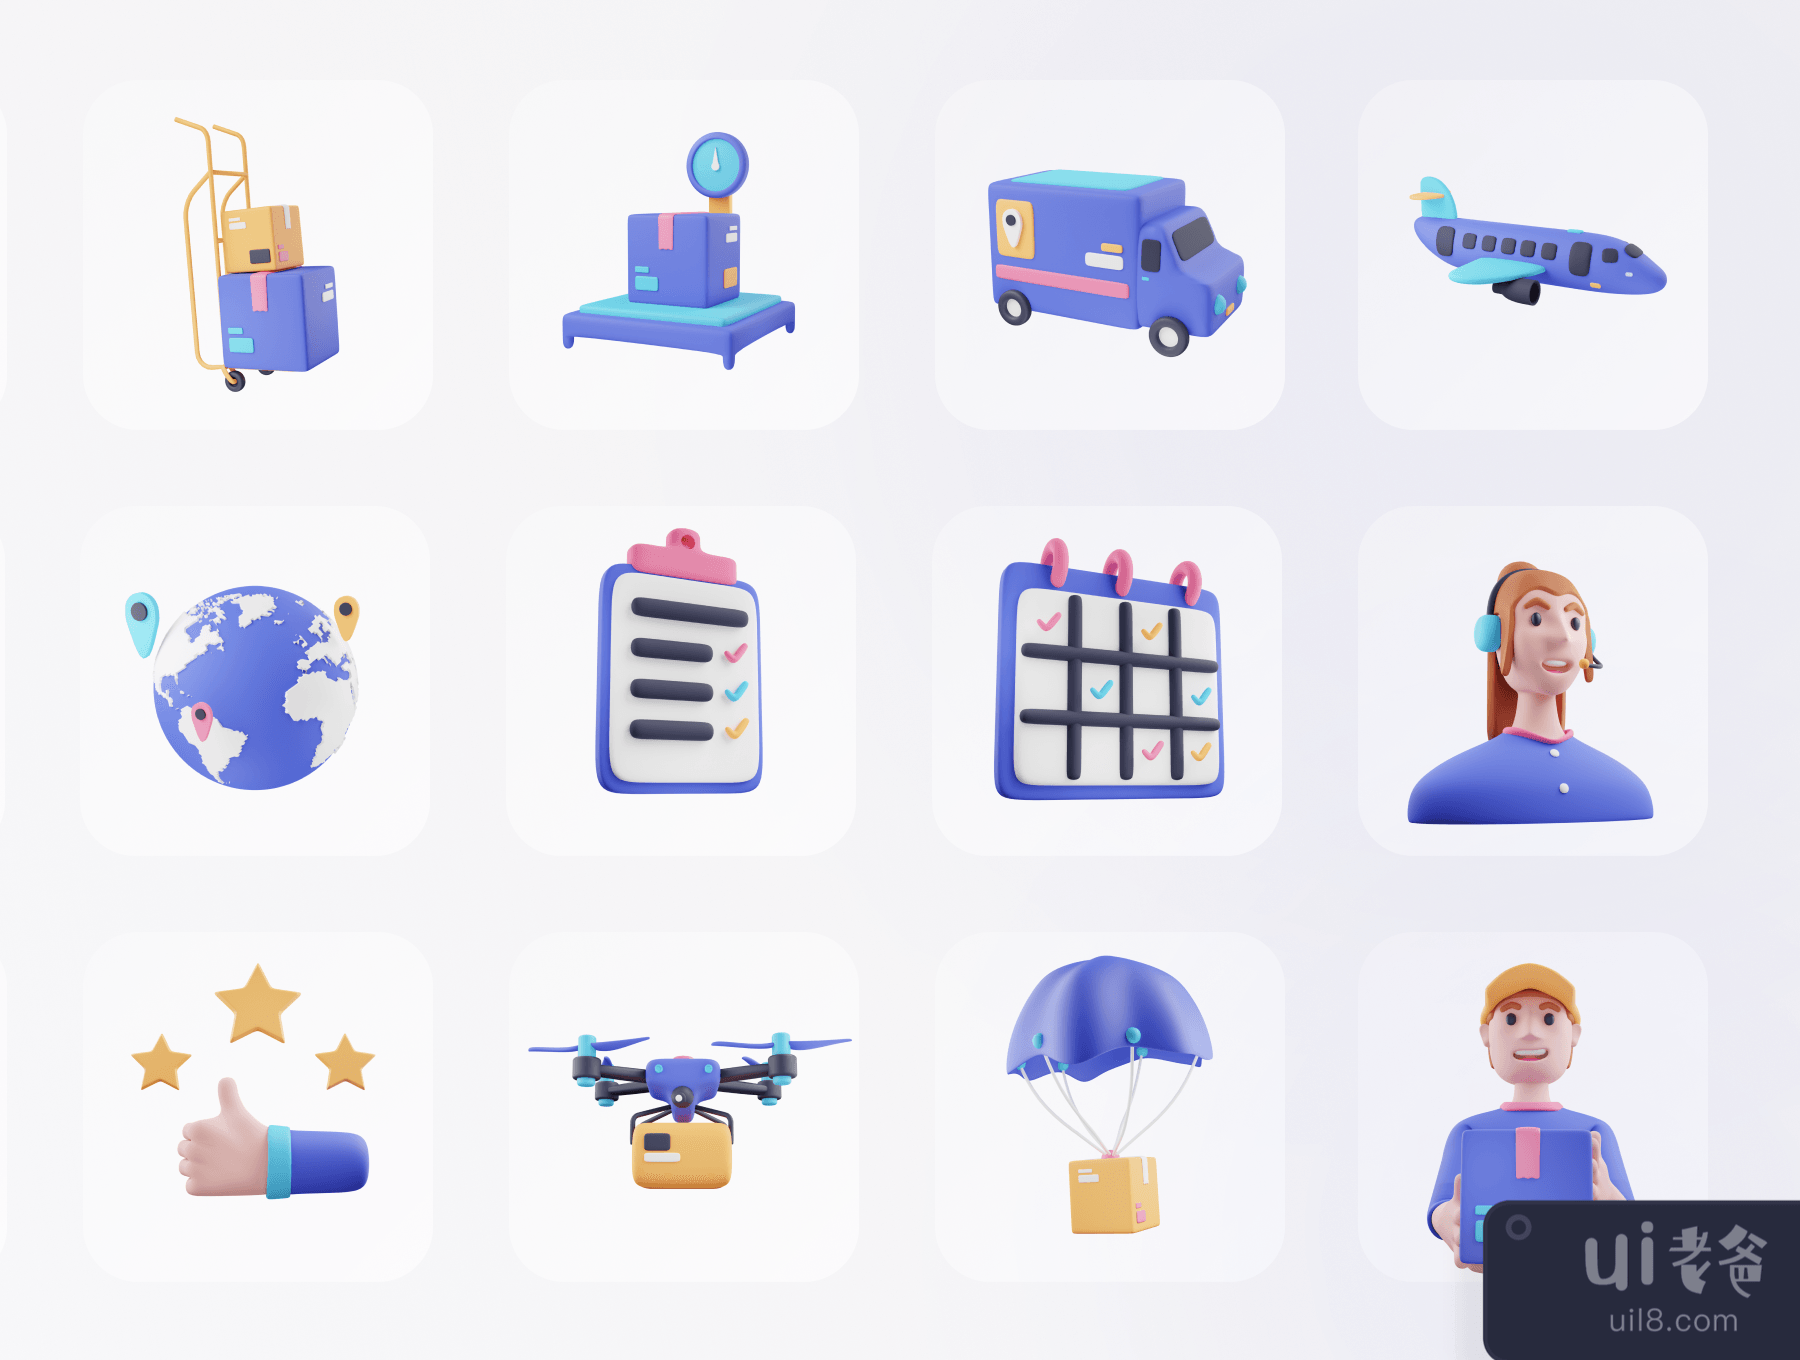 Deliverly - 在线购物配送3D图标集 (Deliverly - Online Shopping Delivery 3D Icon Set)插图7